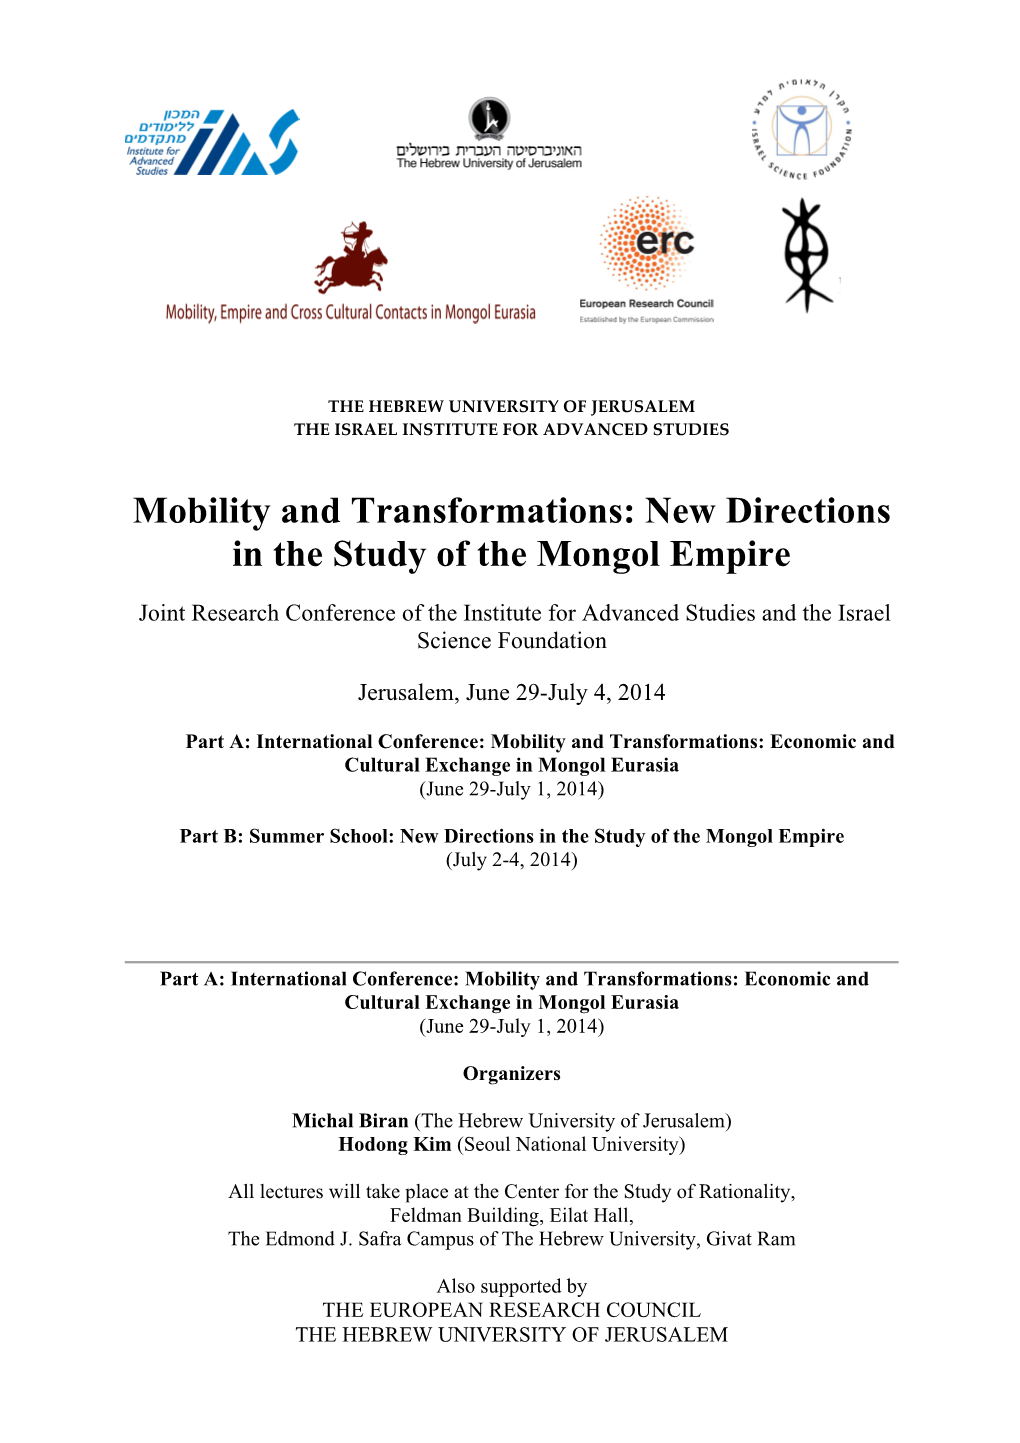 New Directions in the Study of the Mongol Empire